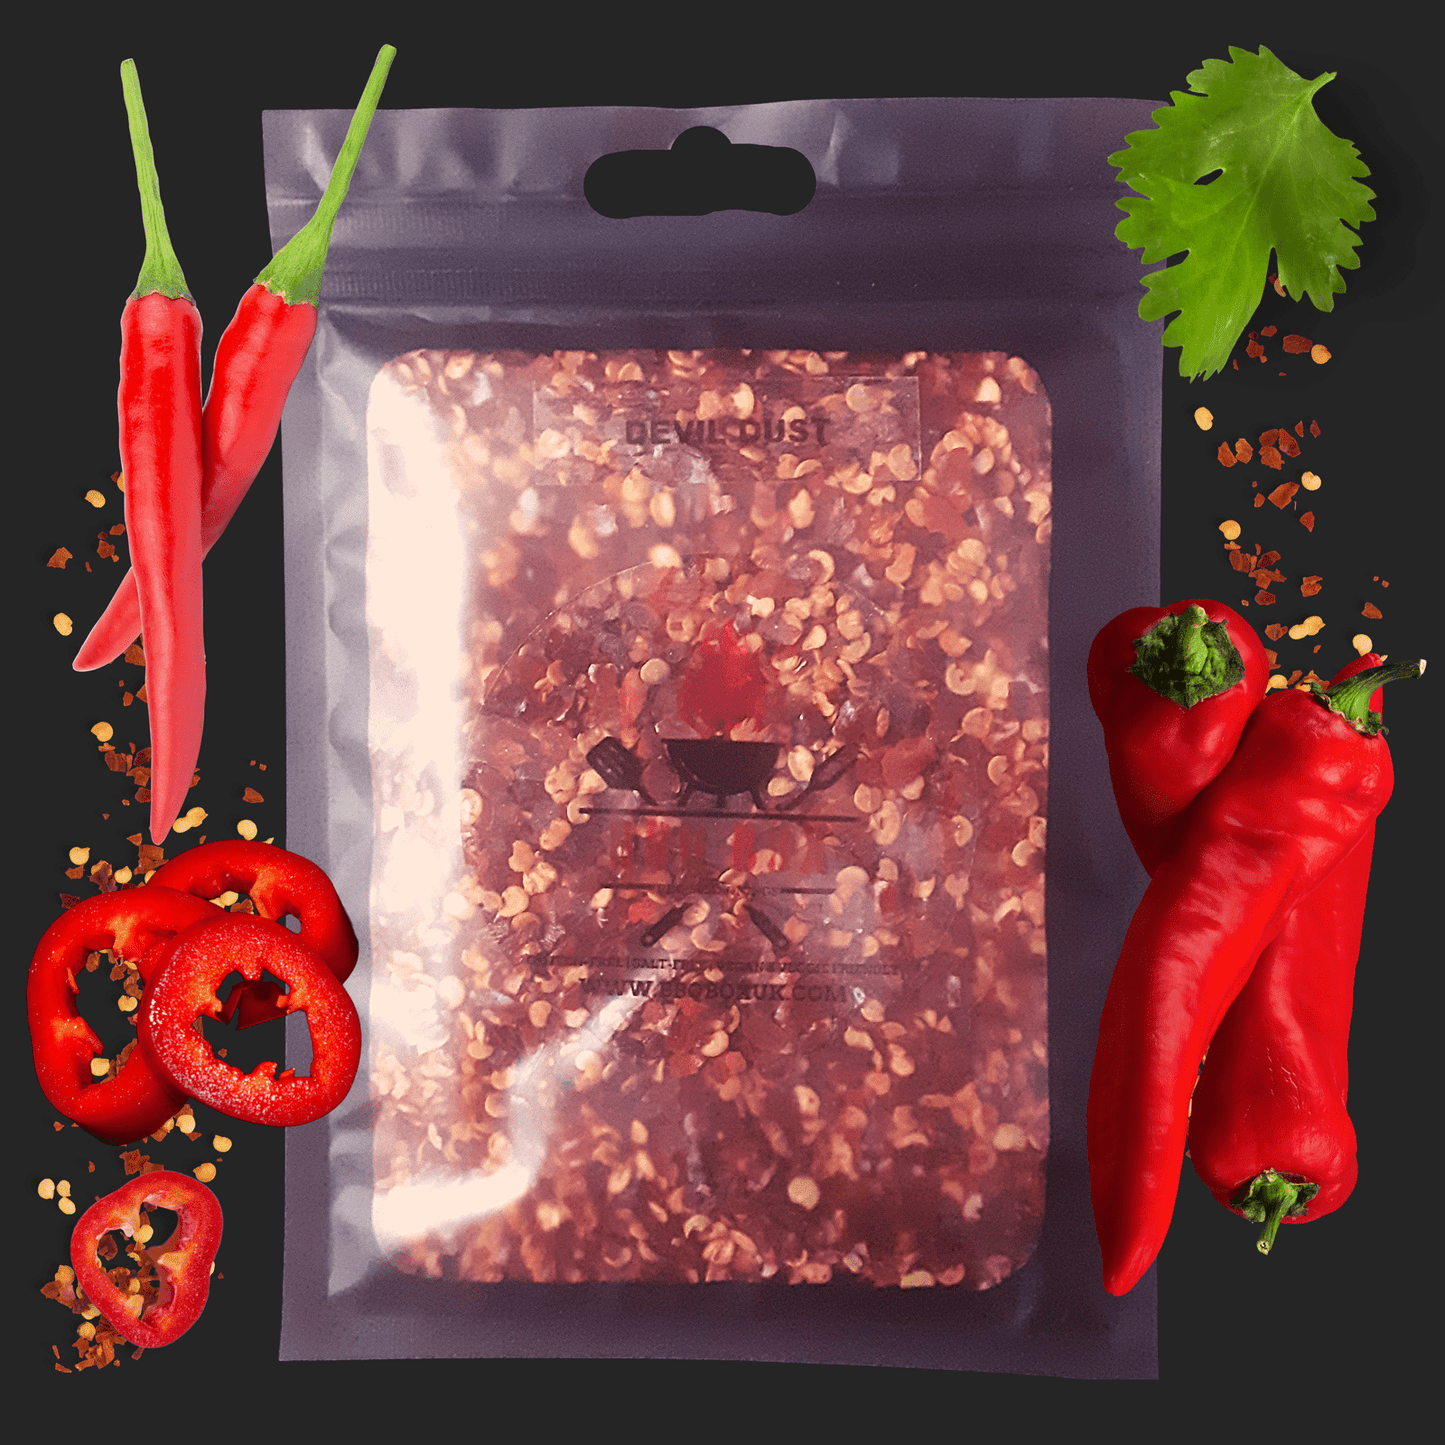 BBQ BOX UK - DEVIL DUST SEASONING POUCH - SPICE UP YOUR MEAT OR VEGGIE DISHES